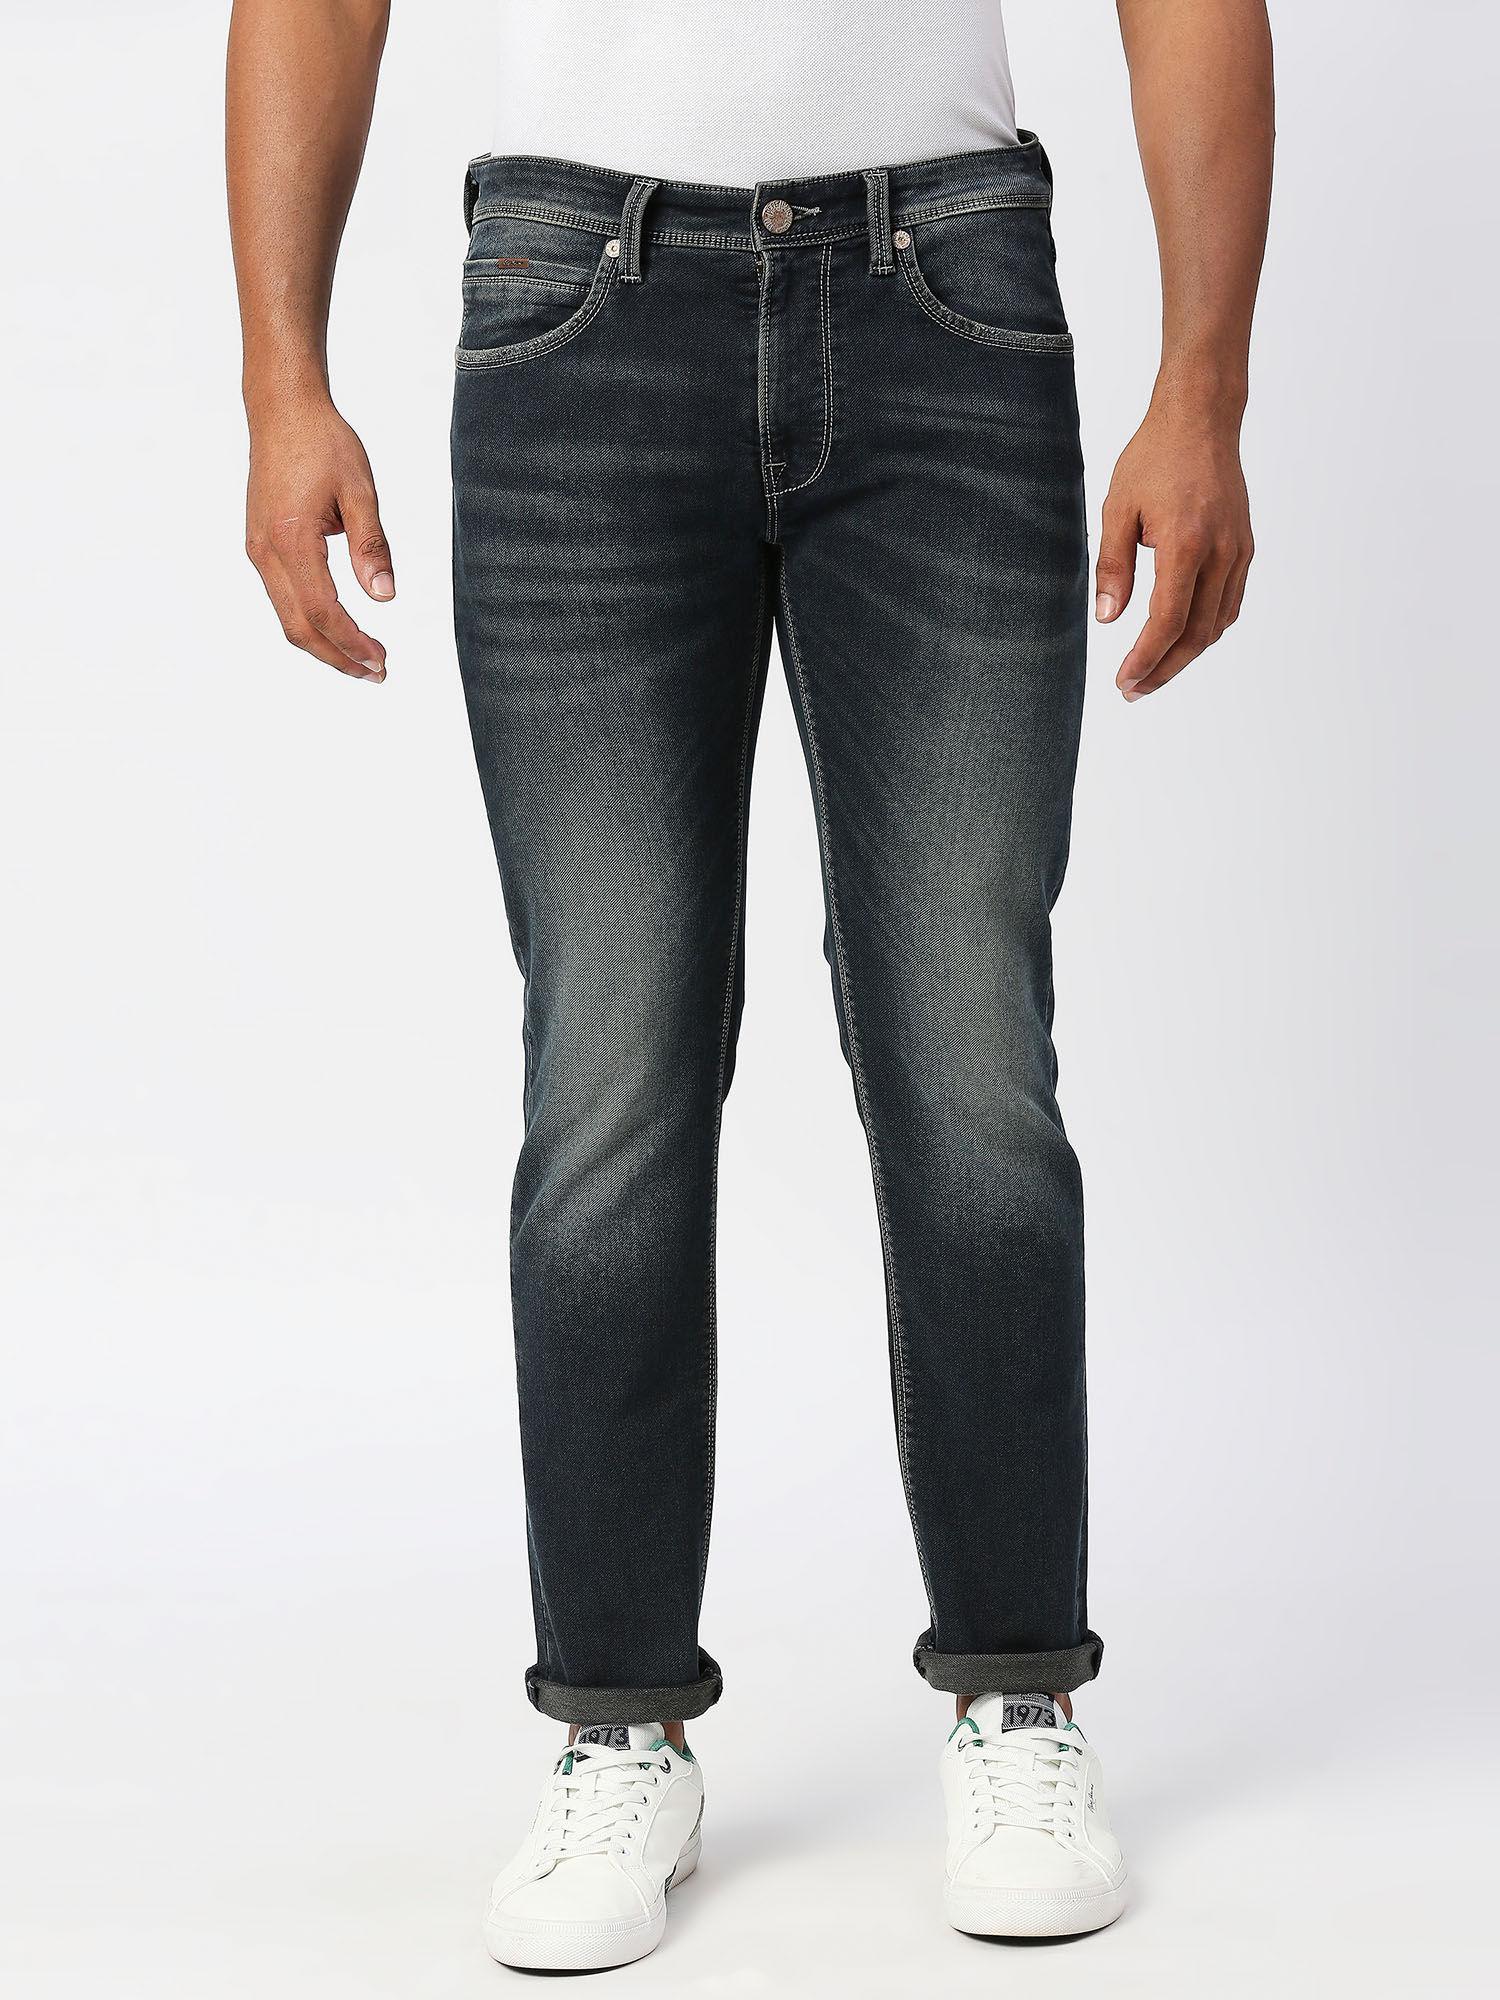 navy blue tapered vapour tapered fit low waist jeans